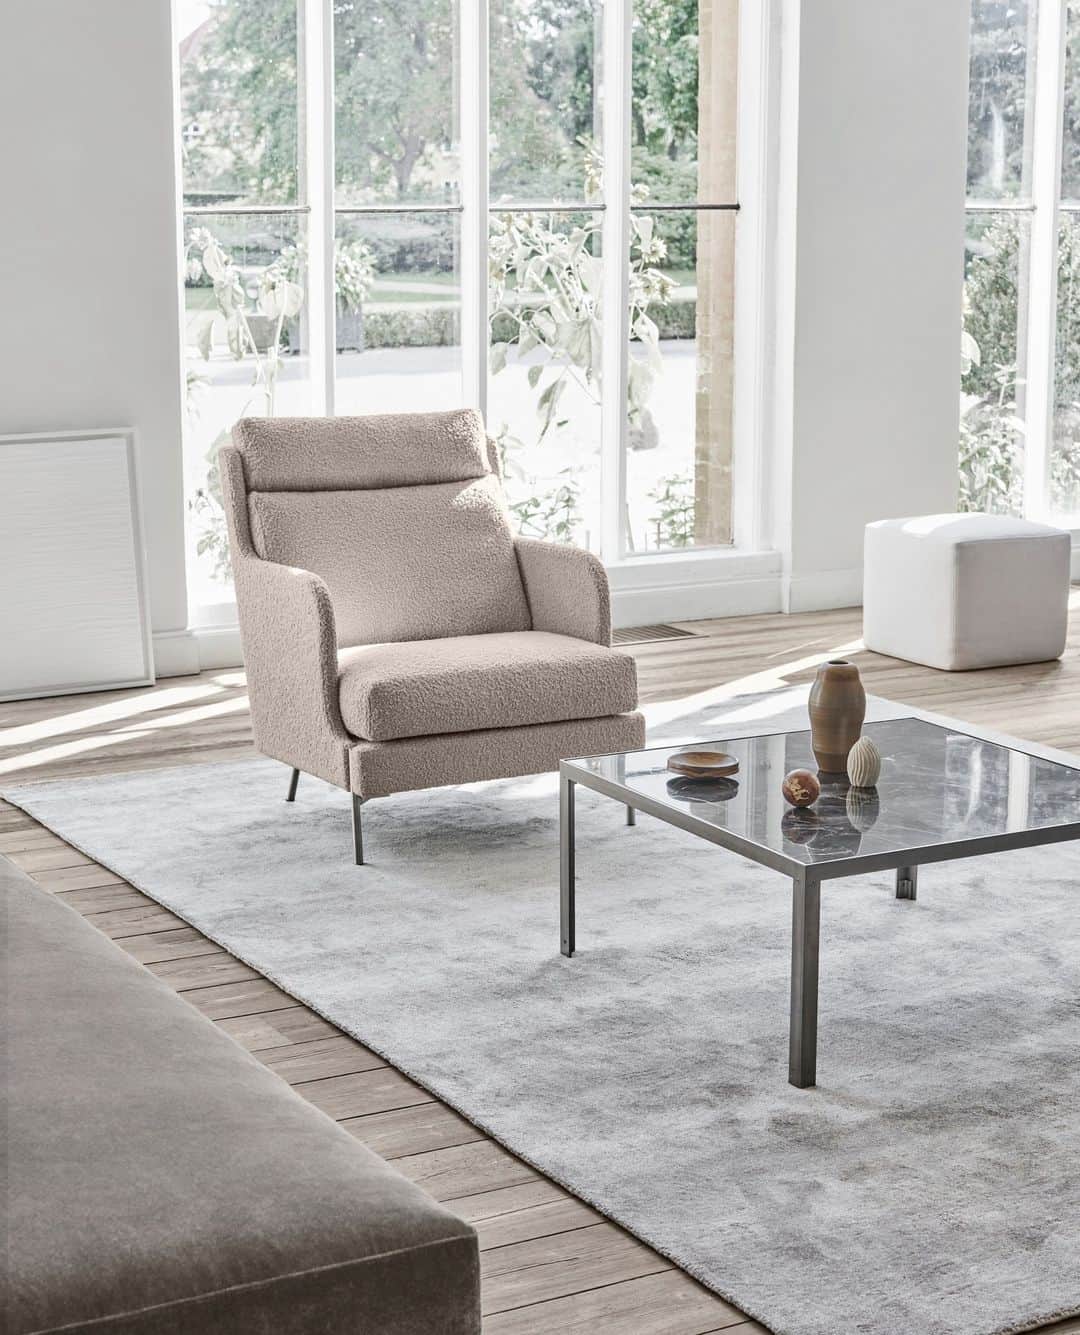 eilersenのインスタグラム：「Funen seems to draw you in with its sensuous, laid-back lines, and you feel immediately at home the moment you nestle into its gentle embrace. Like Eilersen’s sofas, it is a beautiful companion for life and comes in two variants: a low and a tall lounge chair, with heights of 73 cm and 89 cm, that work in a wide variety of different contexts. ⁠ ⁠ ⁠ The low lounge chair offers a comfortable and inviting setting for relaxation and long conversations and works well in pairs or small clusters. The tall chair stands out with its long backrest and comfortable neck cushion that makes it ideal for contemplation, rest and reading. ⁠ ⁠ ⁠ The classic chair is available with an elegant footstool. ⁠ ⁠ ⁠ ⁠ ⁠ ⁠ ⁠ #eilersen #eilersenfurniture #myeilersen #enjoyaneilersen  #funen #pierresindre #homedecor #sofa #danishdesign #inredning #finahem #interiorlovers #interiordesign #modernliving #minimalism #nordiskehjem #nordicinspiration #nordicliving #craftsmanship #boligindretning #designinterior #livingroominspo #boliginspiration  #hemindredning #schönerwohnen #nordicminimalism #designinspiration #throughgenerations」